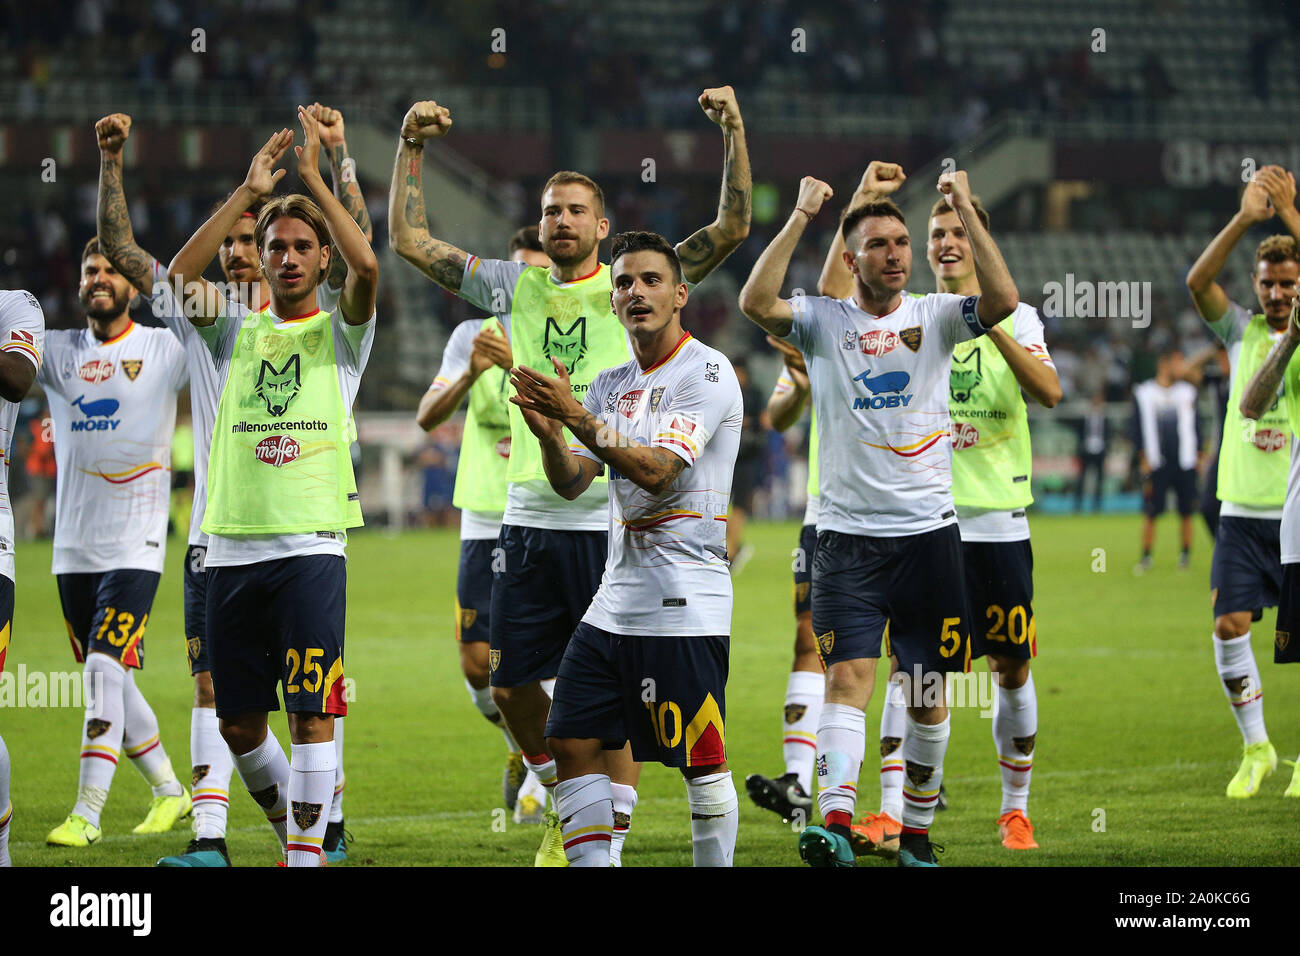 Turin Italy 16th Sep 2019 Soccer Serie A Tim Championship 2019 20 Torino Vs Lecce 1 2 In The Picture Lecce Esulta Under The Curve Credit Independent Photo Agency Alamy Live News Stock Photo Alamy